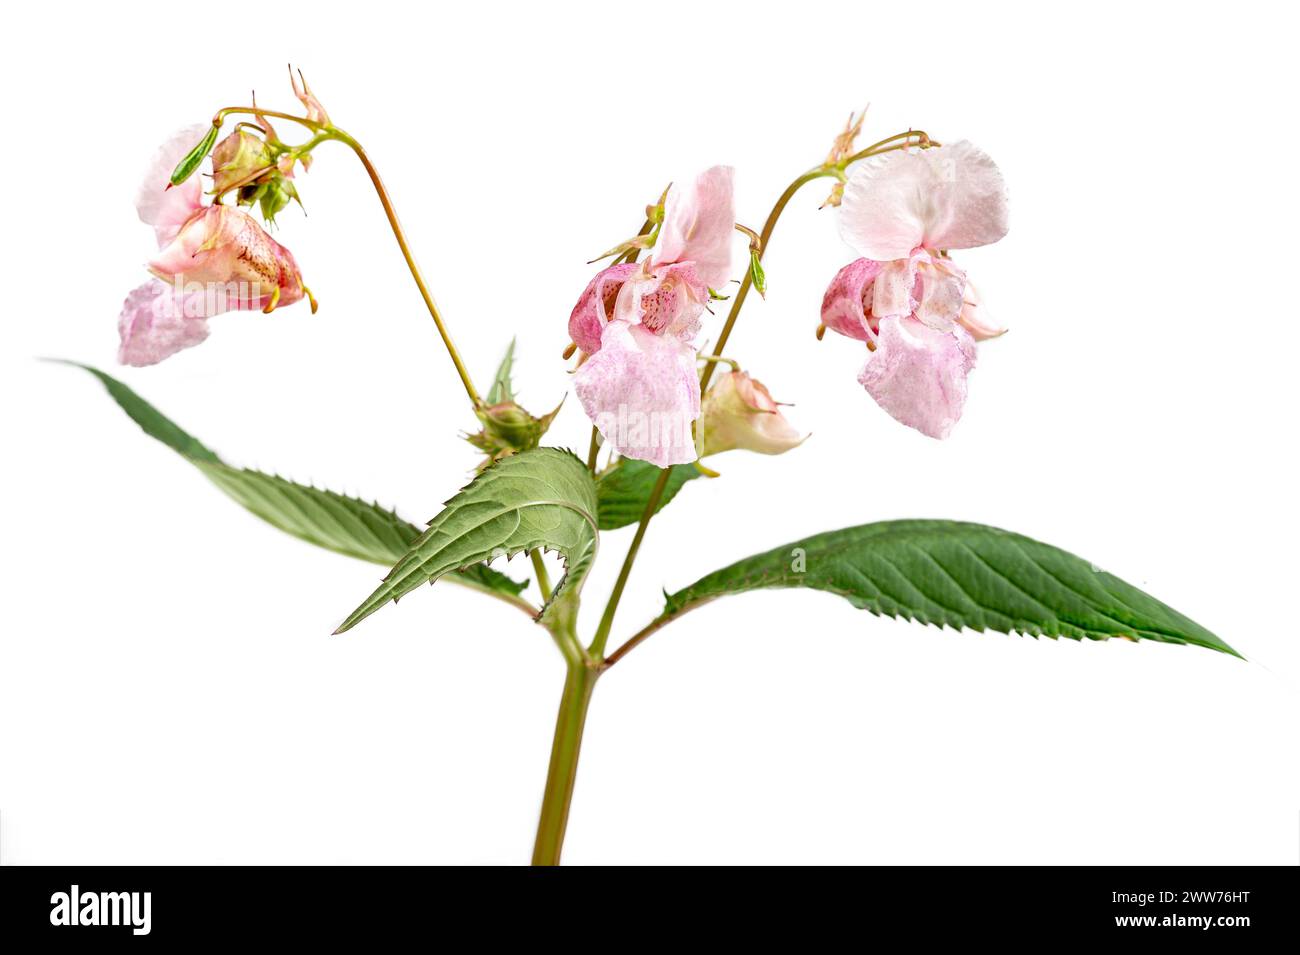 Himalayan balsam, impatiens glandulifera, is a species of flowering plant in the Balsaminaceae family. Stock Photo